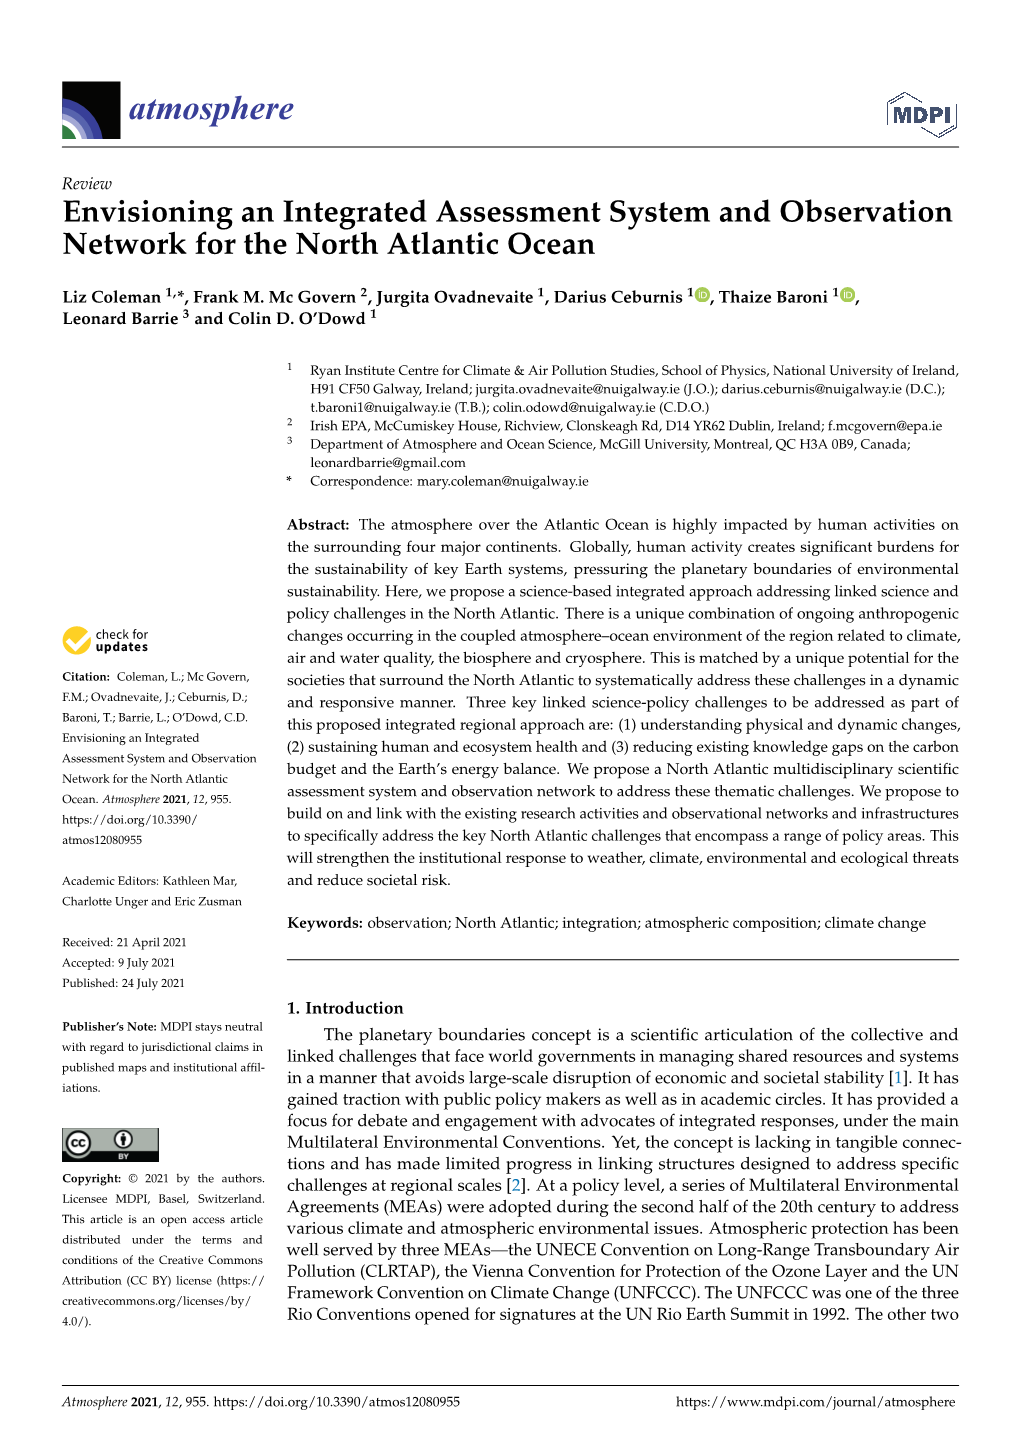 Envisioning an Integrated Assessment System and Observation Network for the North Atlantic Ocean